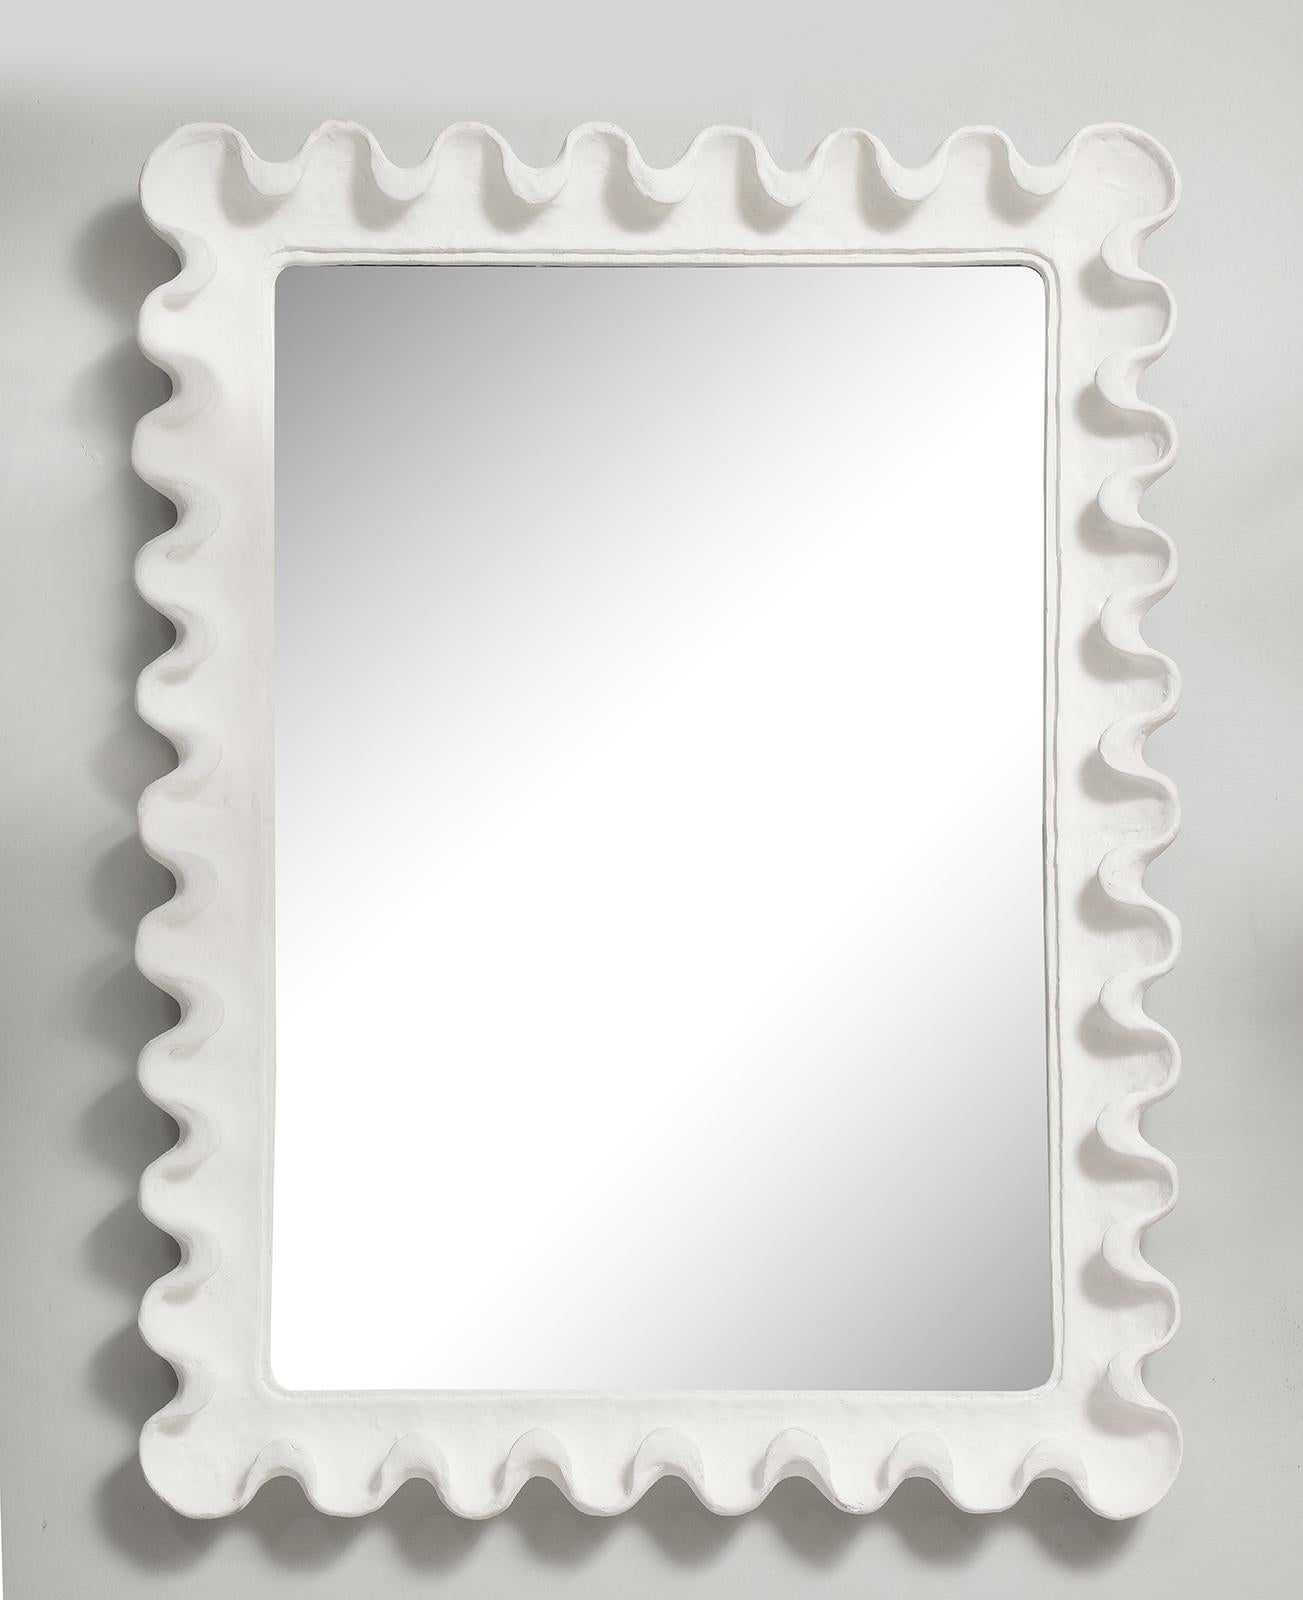 Bespoke undulating plaster mirror. This mirror is customizable.
Lead Time for custom made is 8-10 weeks.